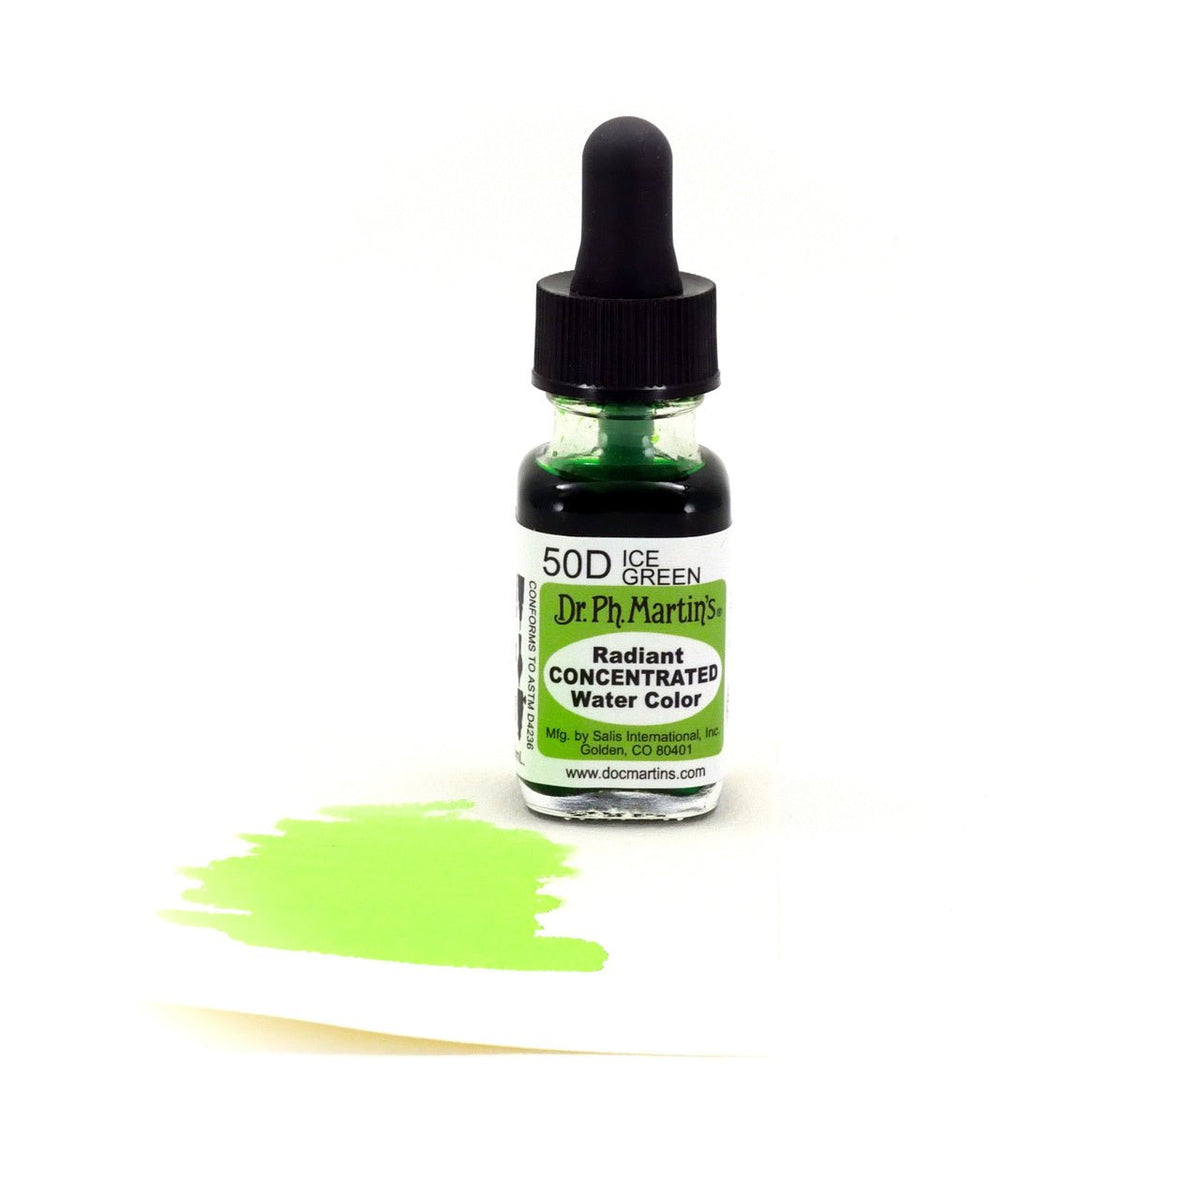 Dr. Ph. Martin's Radiant Watercolor .5 oz - Ice Green - merriartist.com